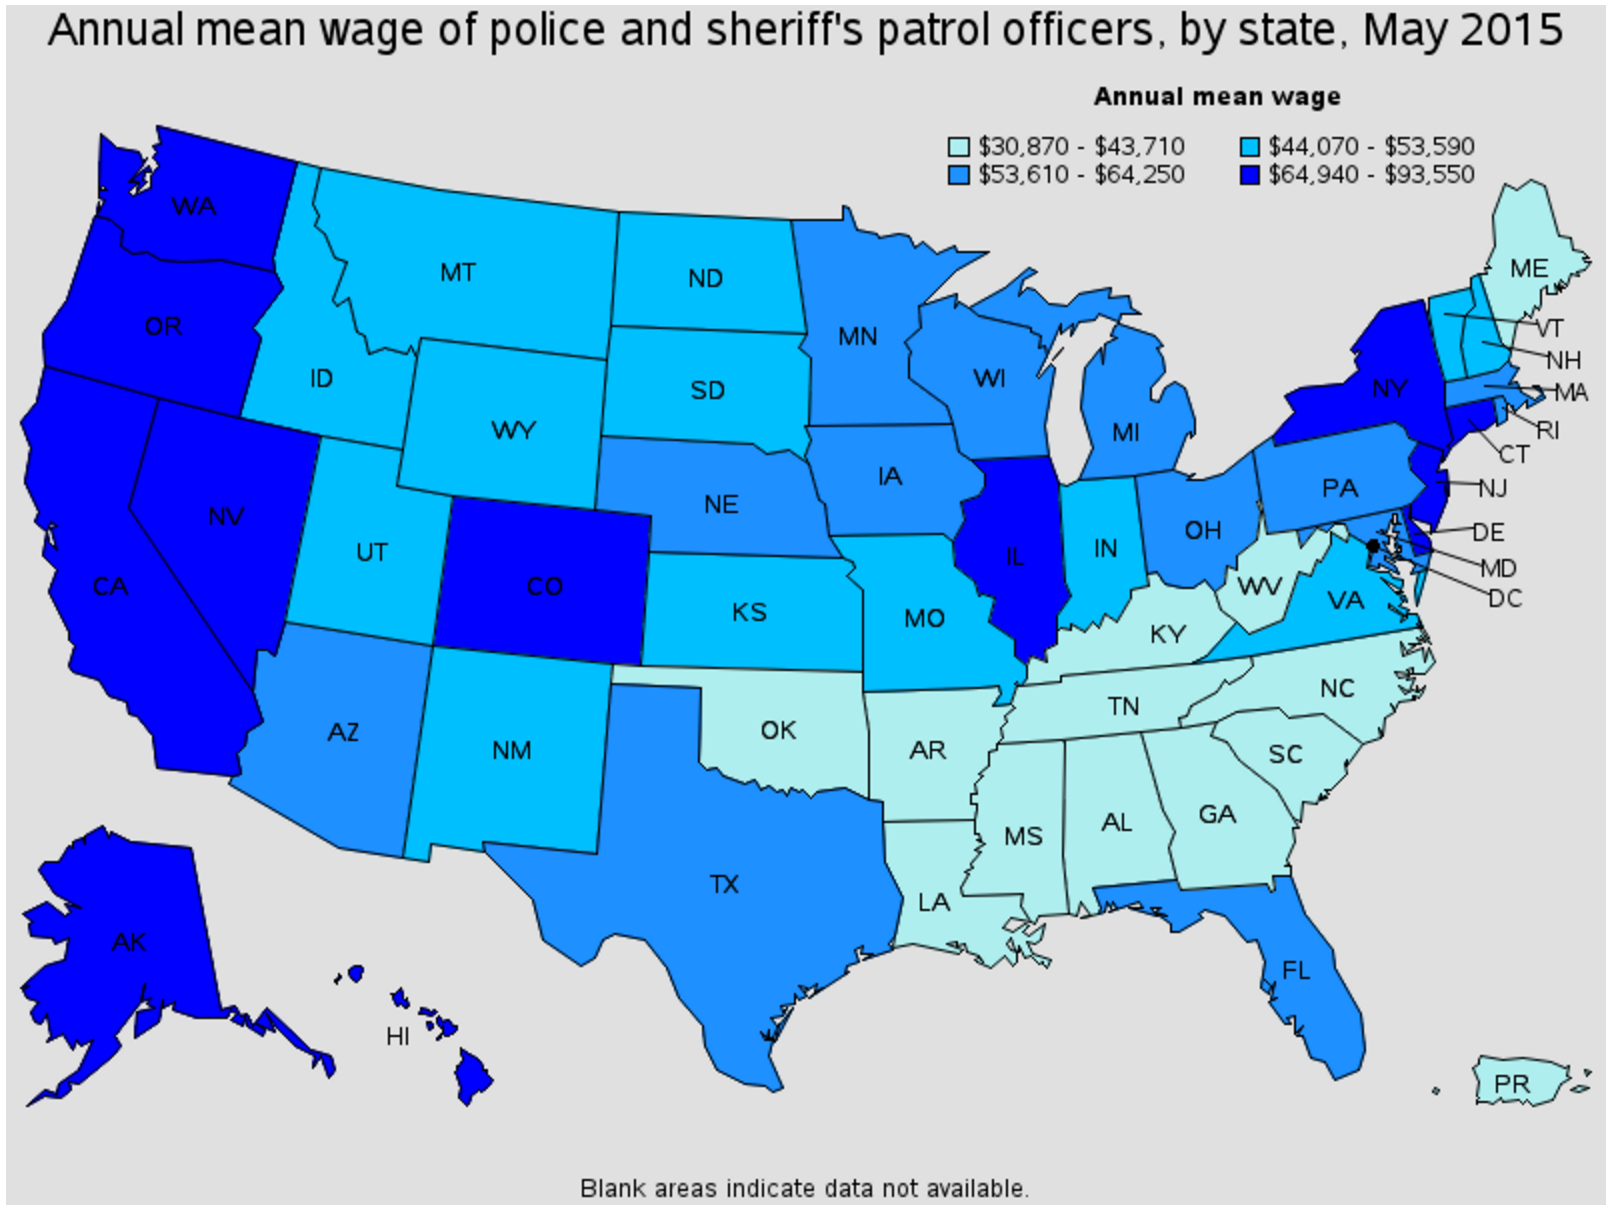 National Park police officer average salary by state